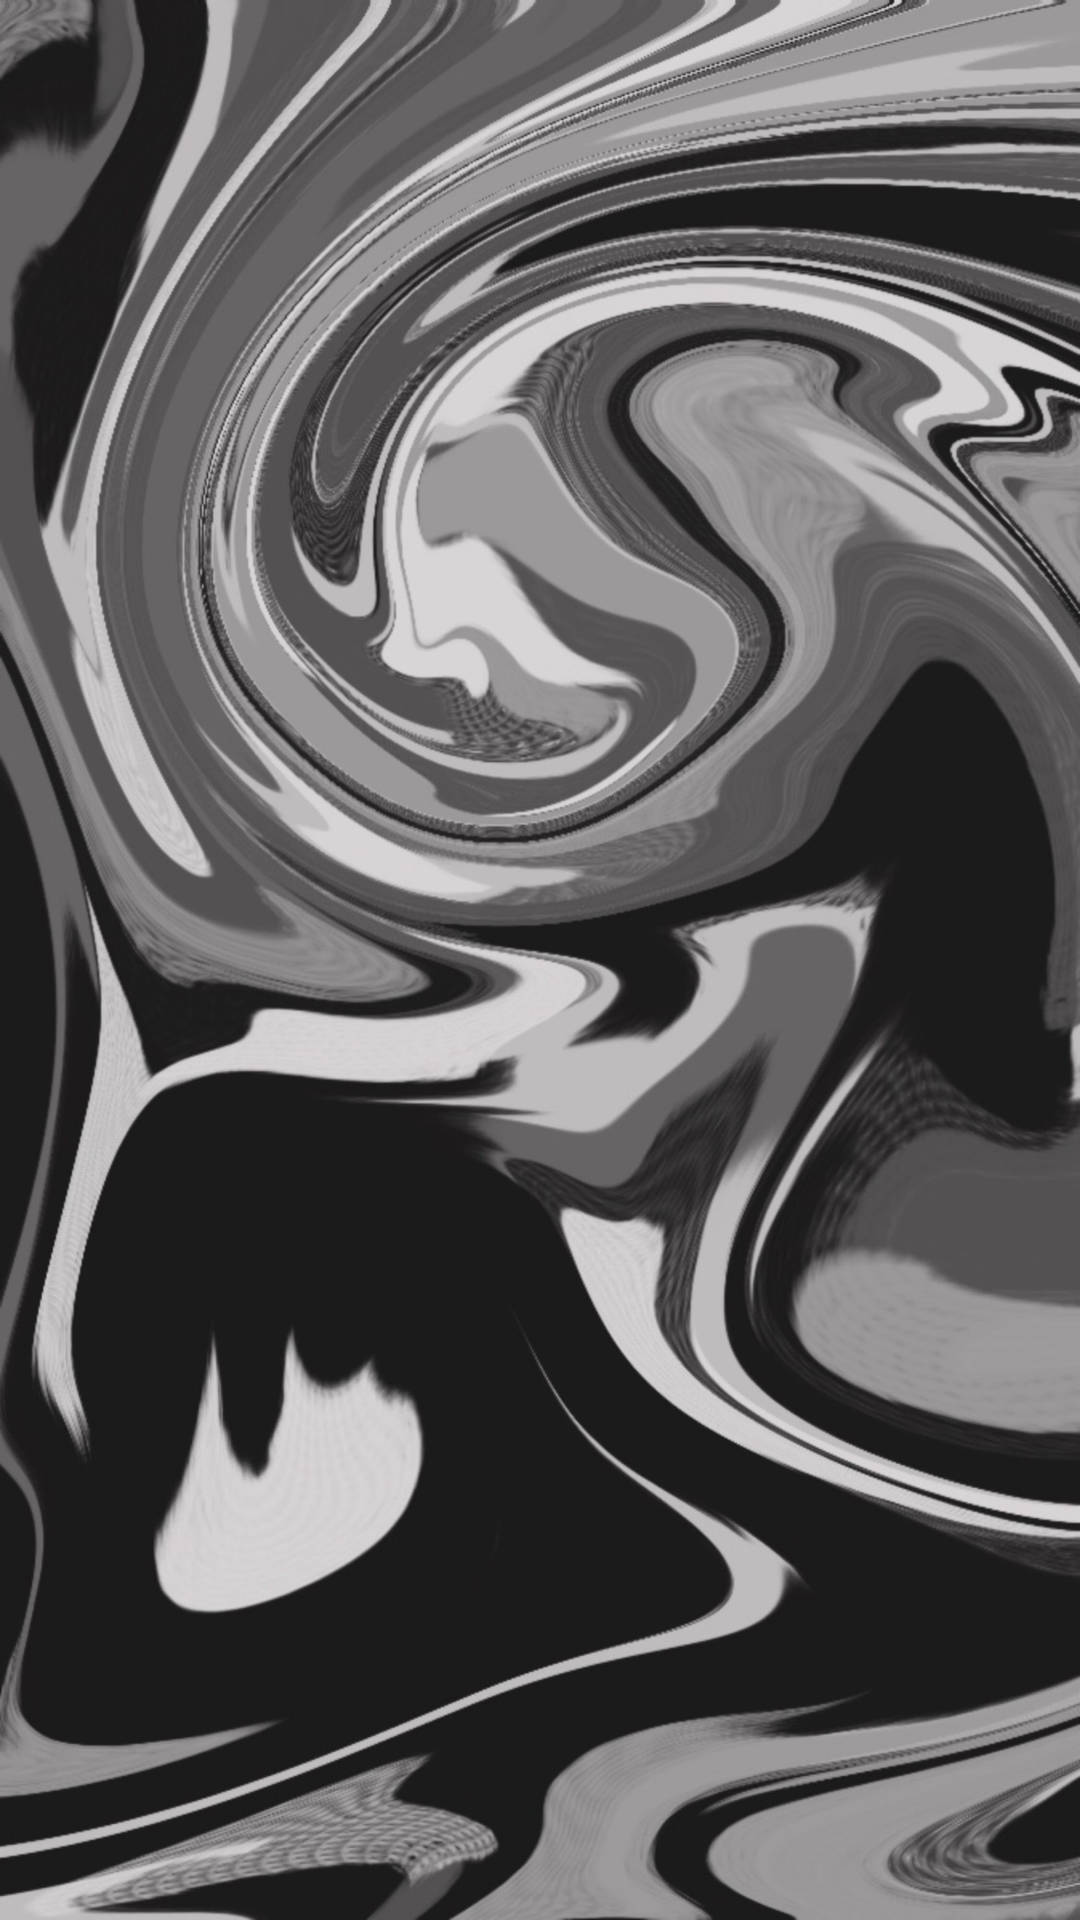 Abstract Swirl Black And Grey Iphone